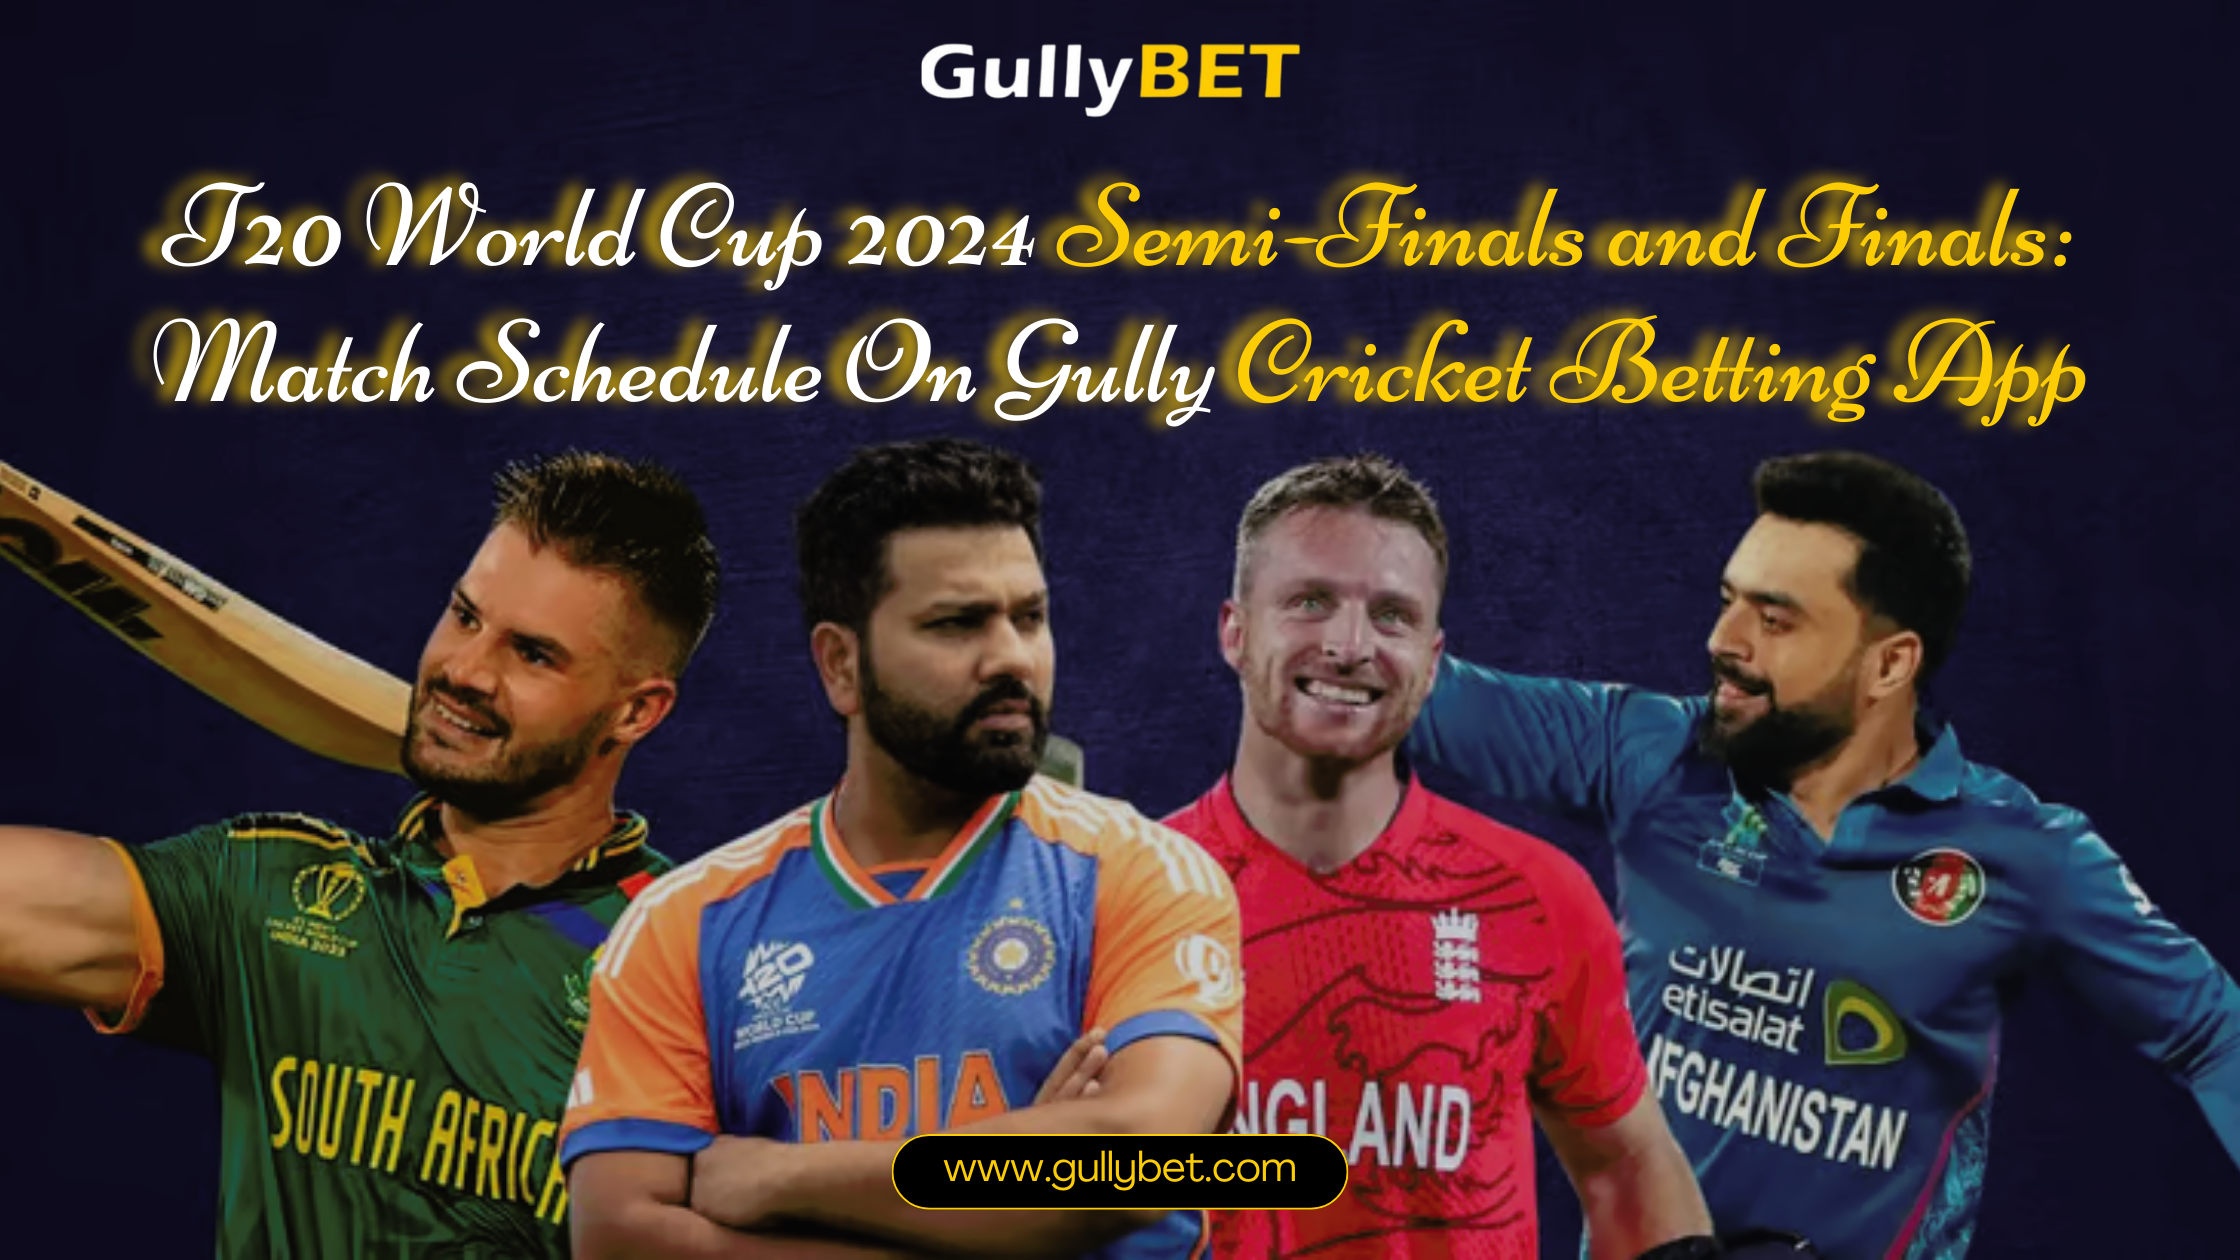 T20 World Cup 2024 Semi-Finals and Finals: Match Schedule on Gully Cricket Betting App